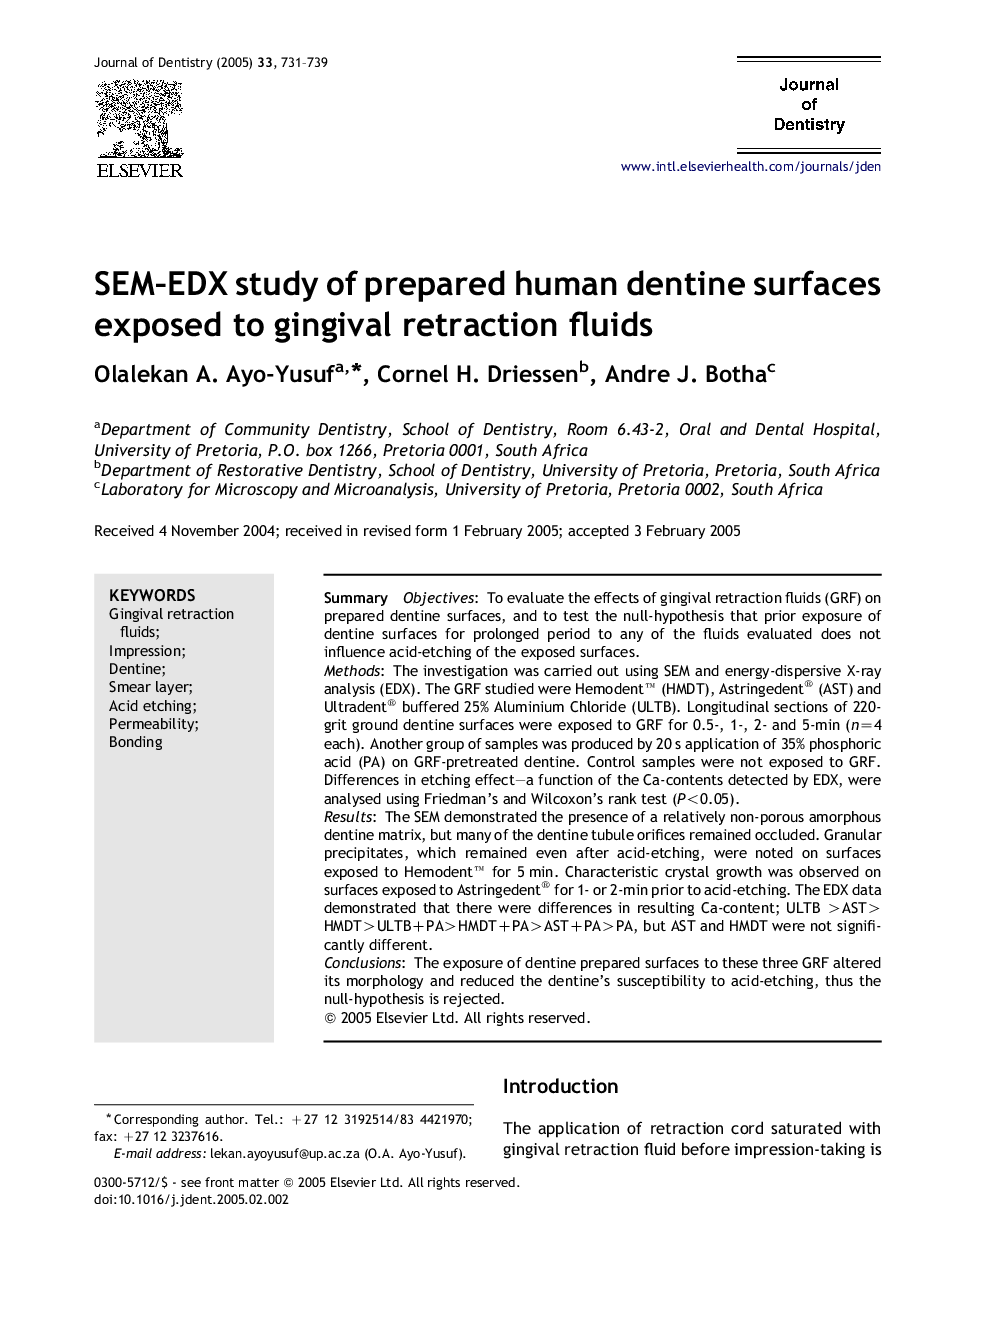 SEM-EDX study of prepared human dentine surfaces exposed to gingival retraction fluids